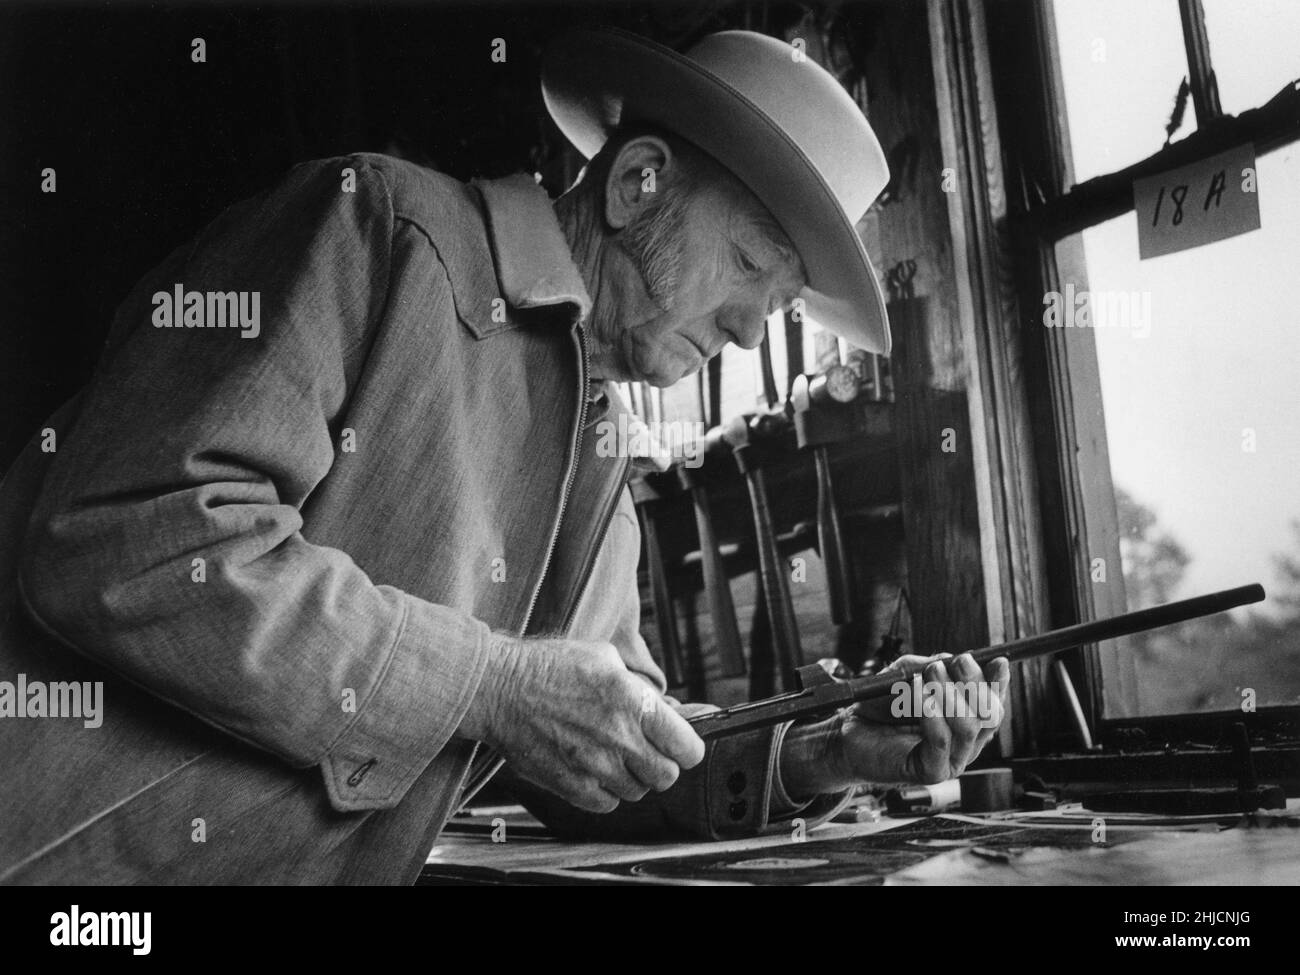 Carbine Williams invented the M-1 Carbine, which was the basic weapon for soldiers during WWII. He created the carbine while serving time in prison in NC on a moonshine charge. The prison warden allowed him to work on this project, and Carbine became famous for his invention. In the picture, he is at work in his gun shop near Fayetteville, NC, before the shop was moved near the Hall of History, in Raleigh. Douglas MacArthur once said, 'Without Carbine's carbine, the US might not have won WWII.' Stock Photo